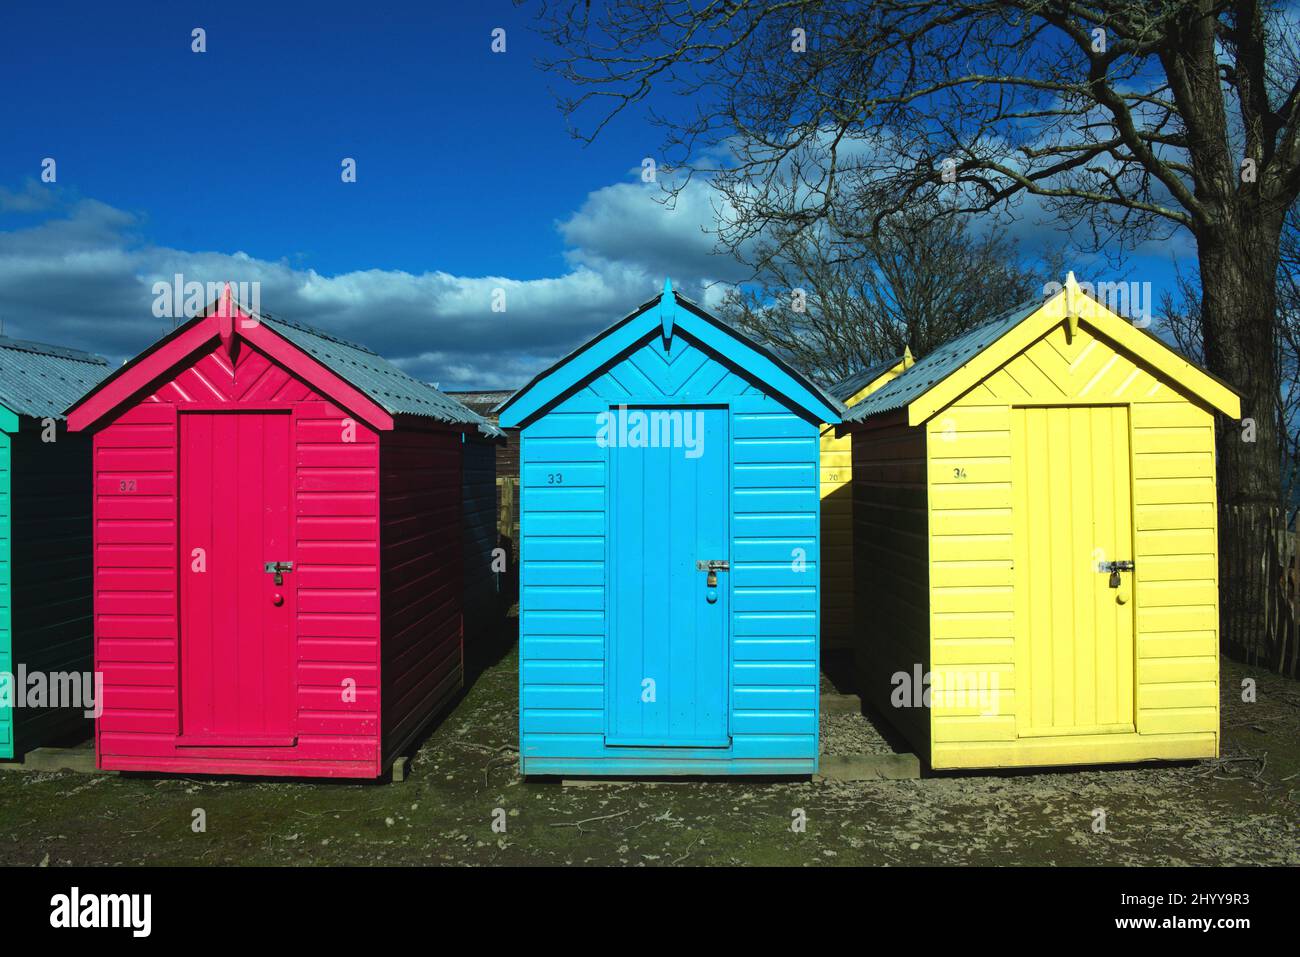 Iconic, old fashioned beach huts. Typical British seaside scene at Abersoch, north Wales on a sunny spring day. Close up view Stock Photo